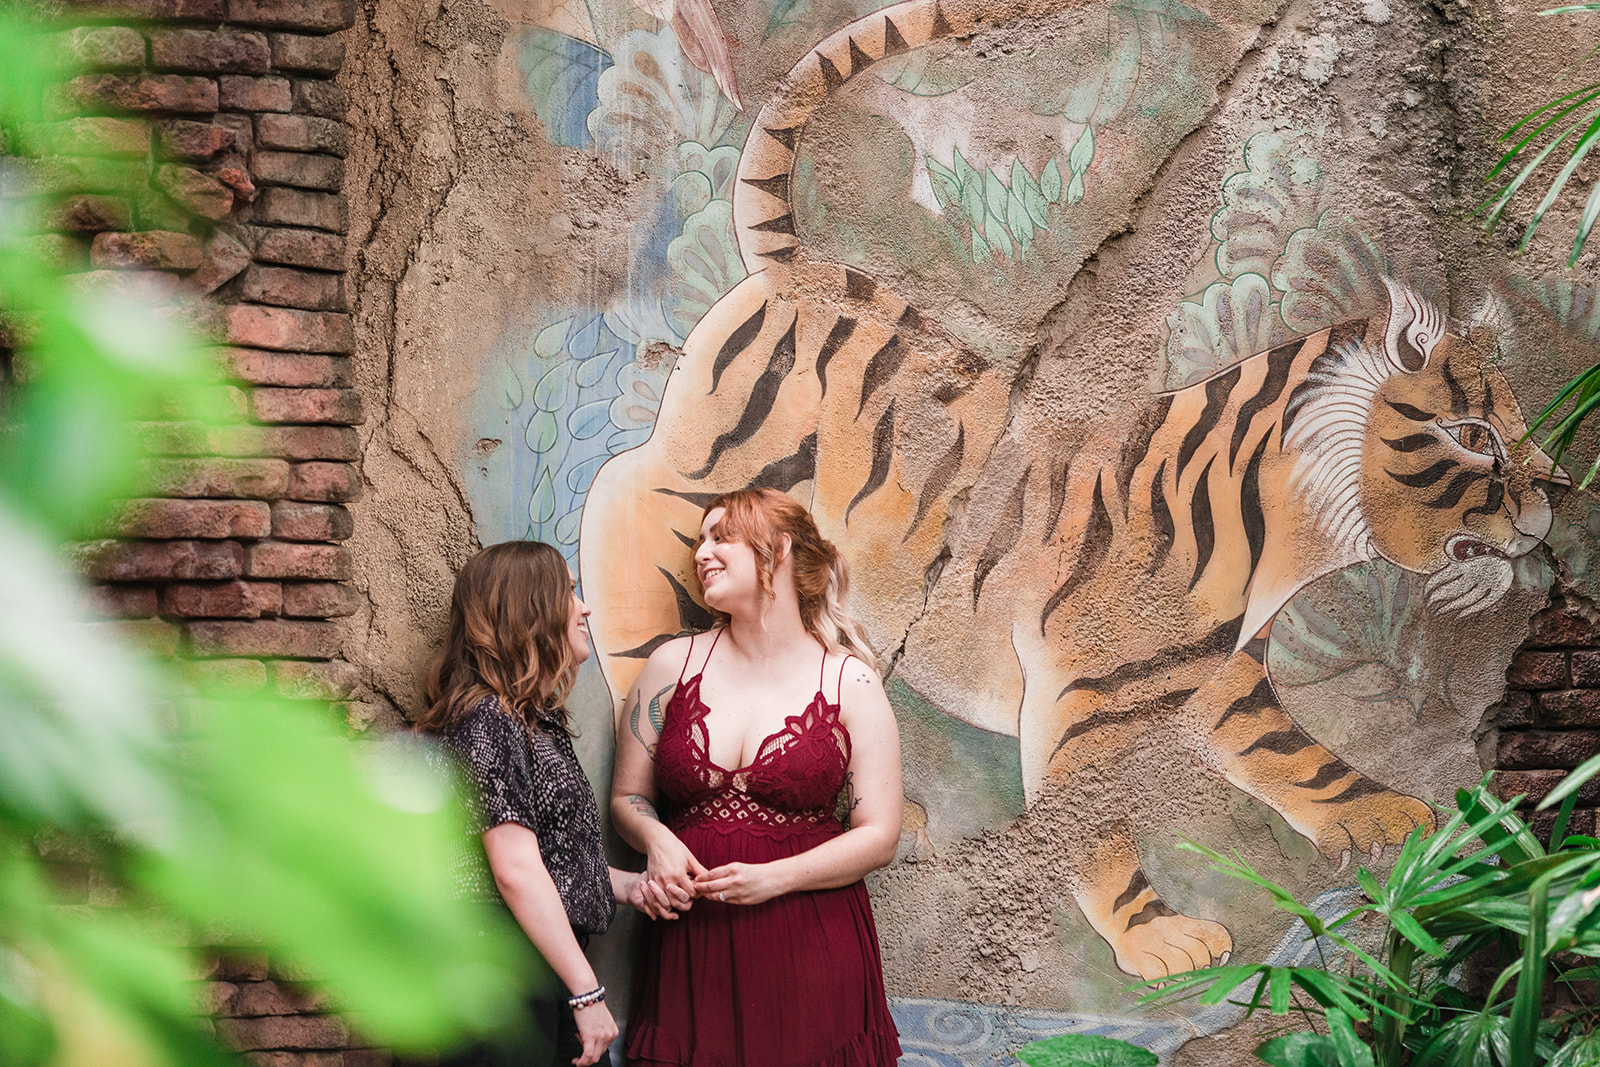 Amidst a wall painting of a tiger, two brides embrace, one kissing the other's cheek, while the vibrant scenery adds to the enchantment of their love.